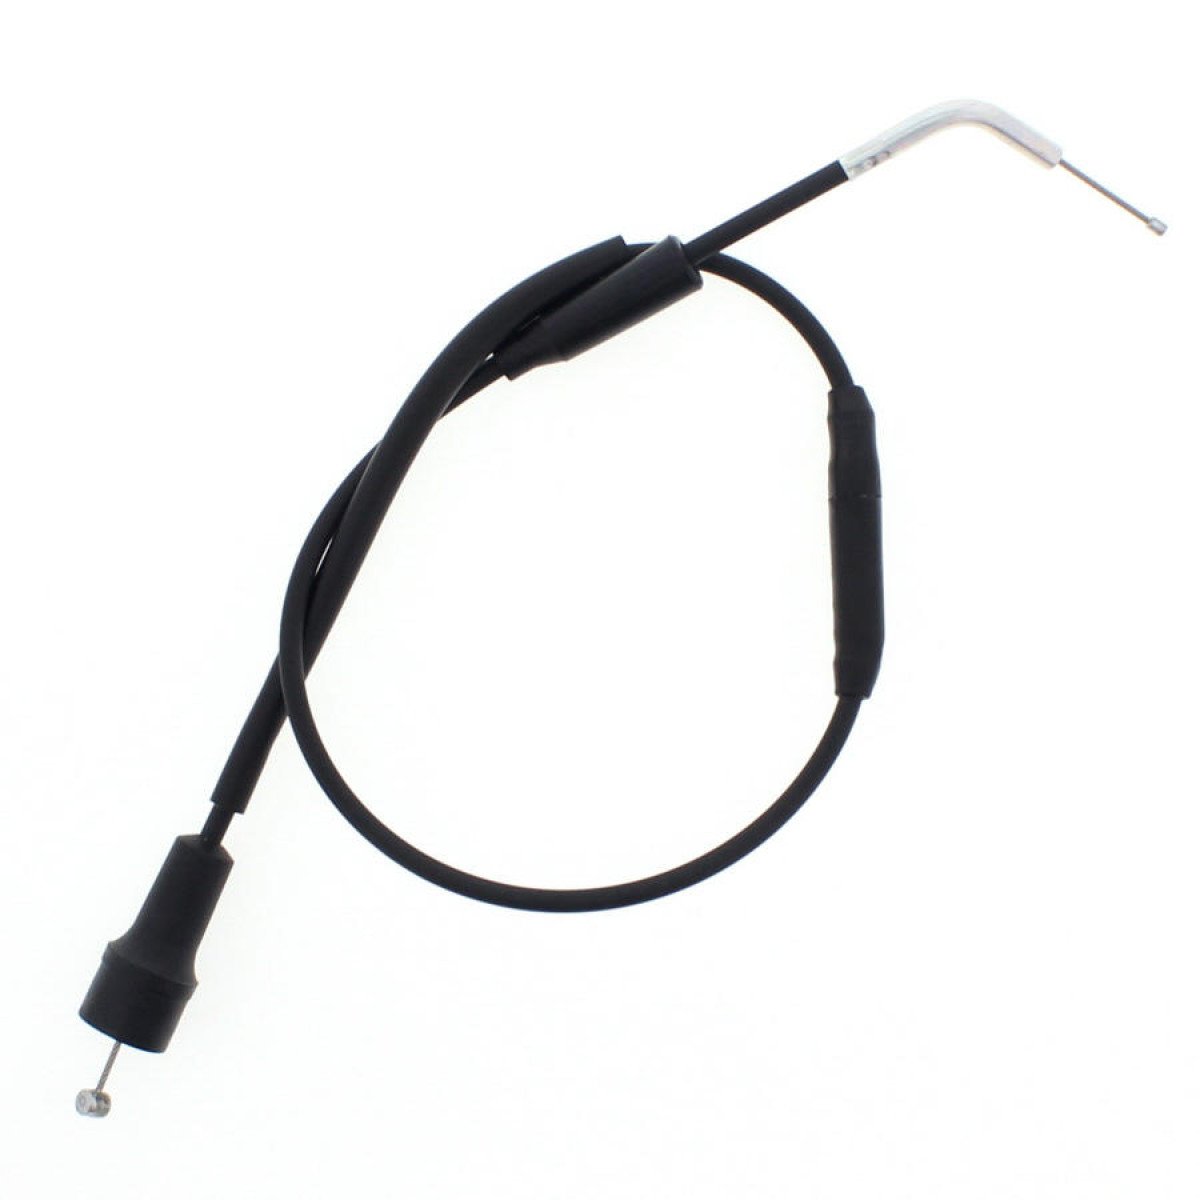 Moose Throttle Cable for Suzuki RM250 1997 